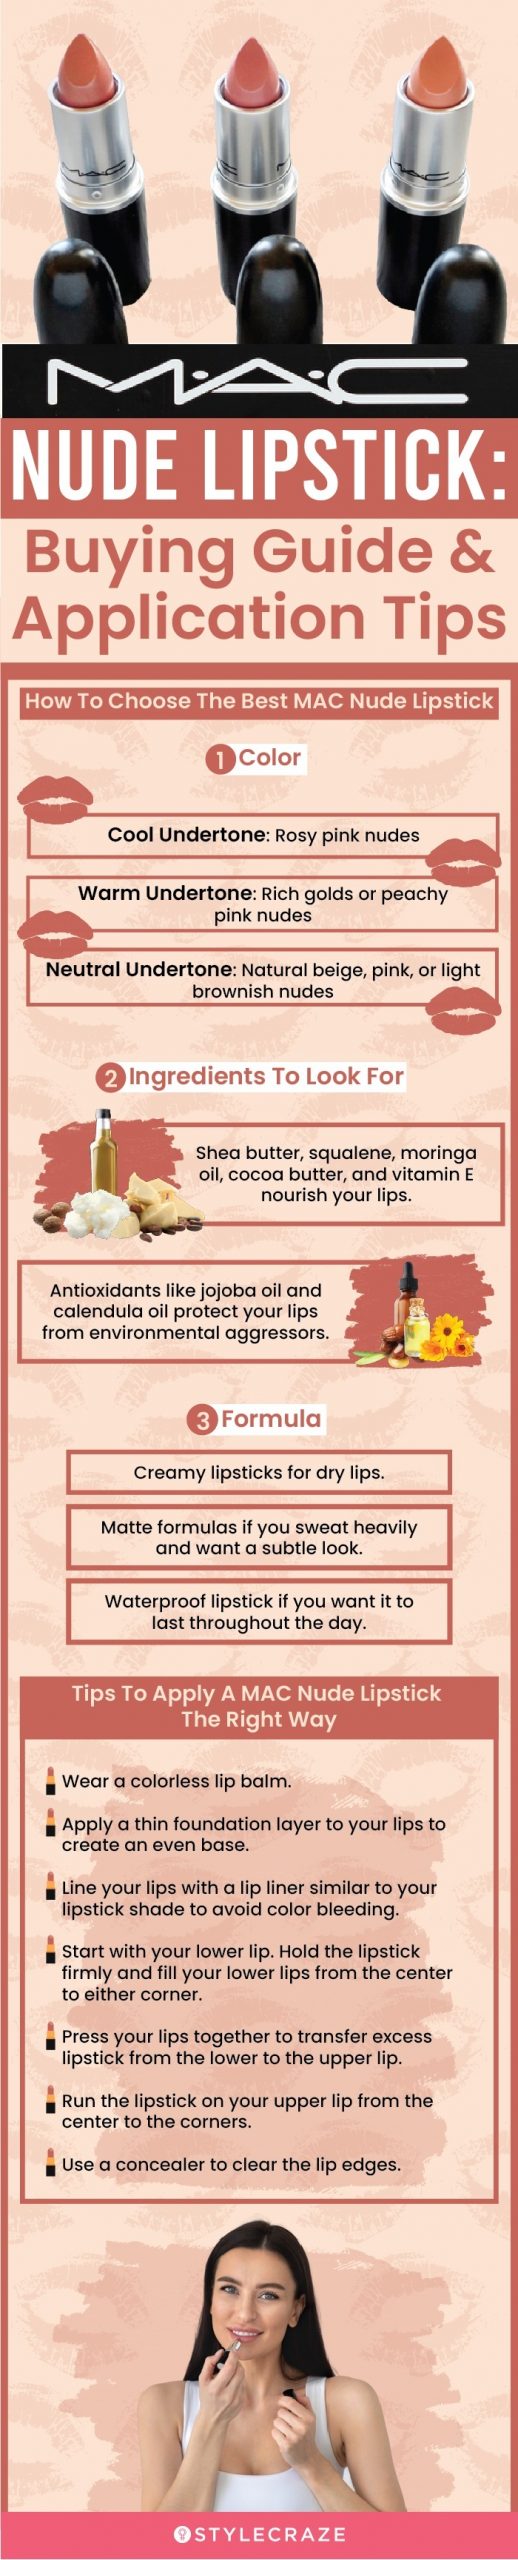 MAC Nude Lipstick: Buying Guide & Application Tips (infographic)